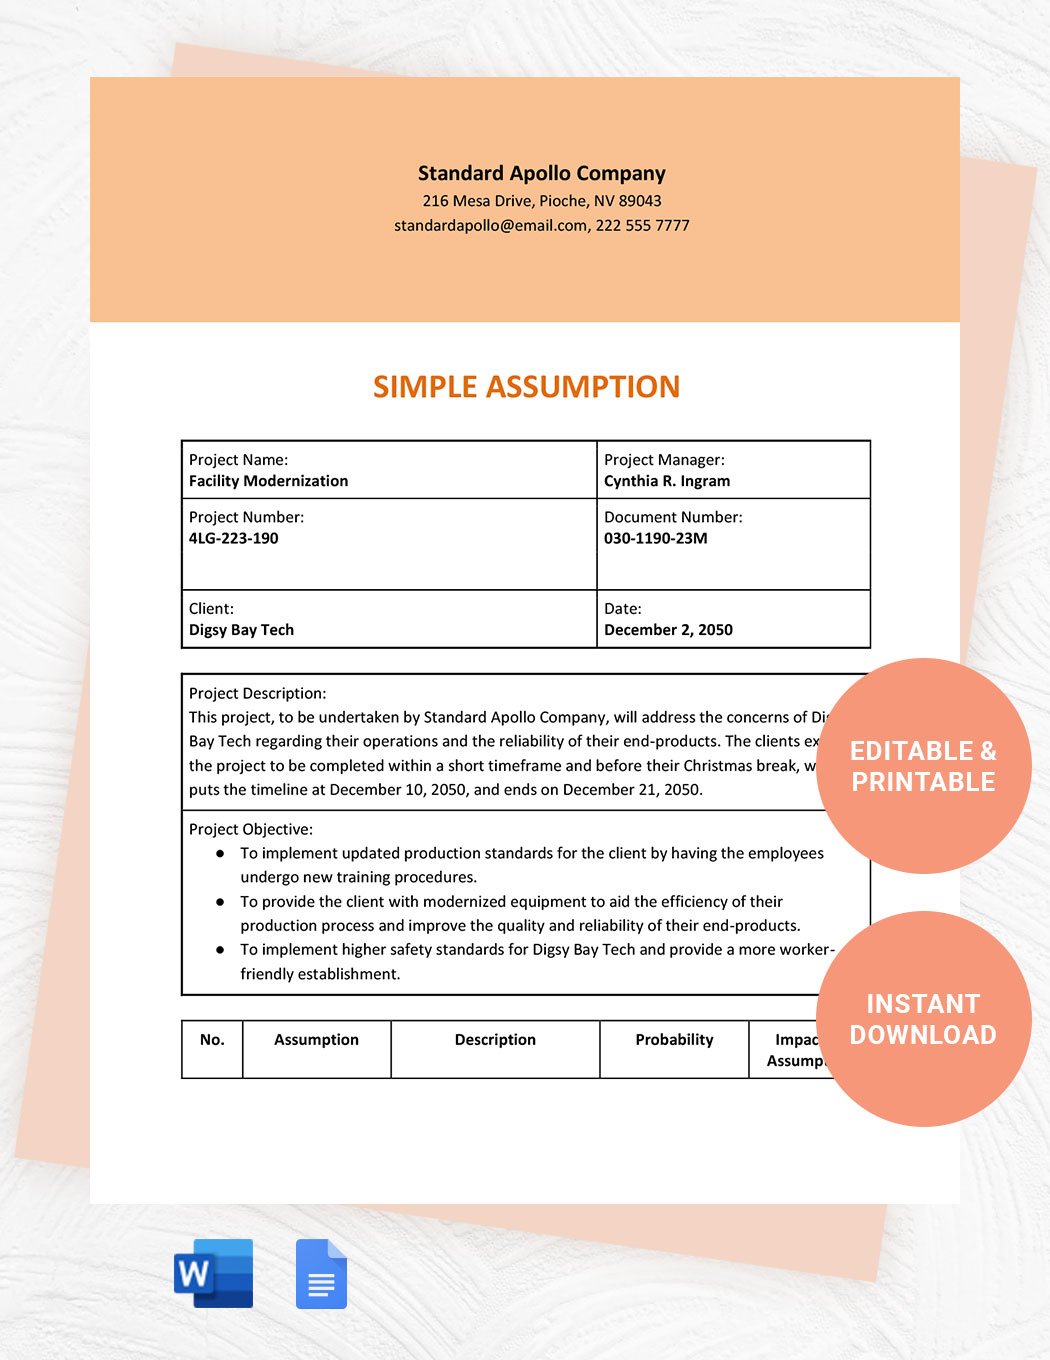 Simple Assumption Template in Word, Google Docs